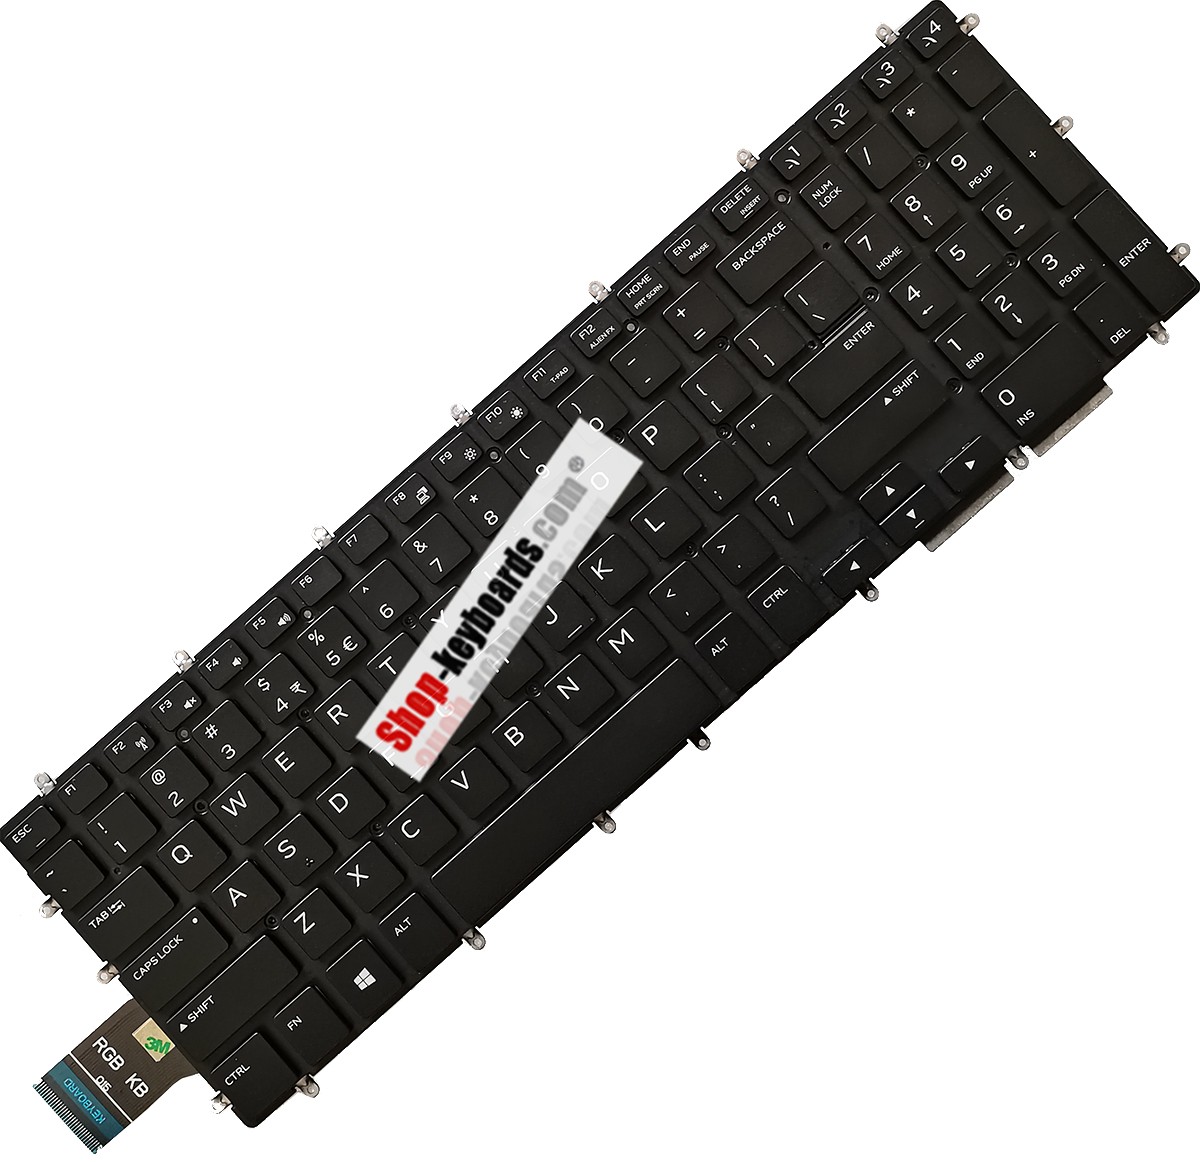 Dell 0KN4-0D1US16 Keyboard replacement